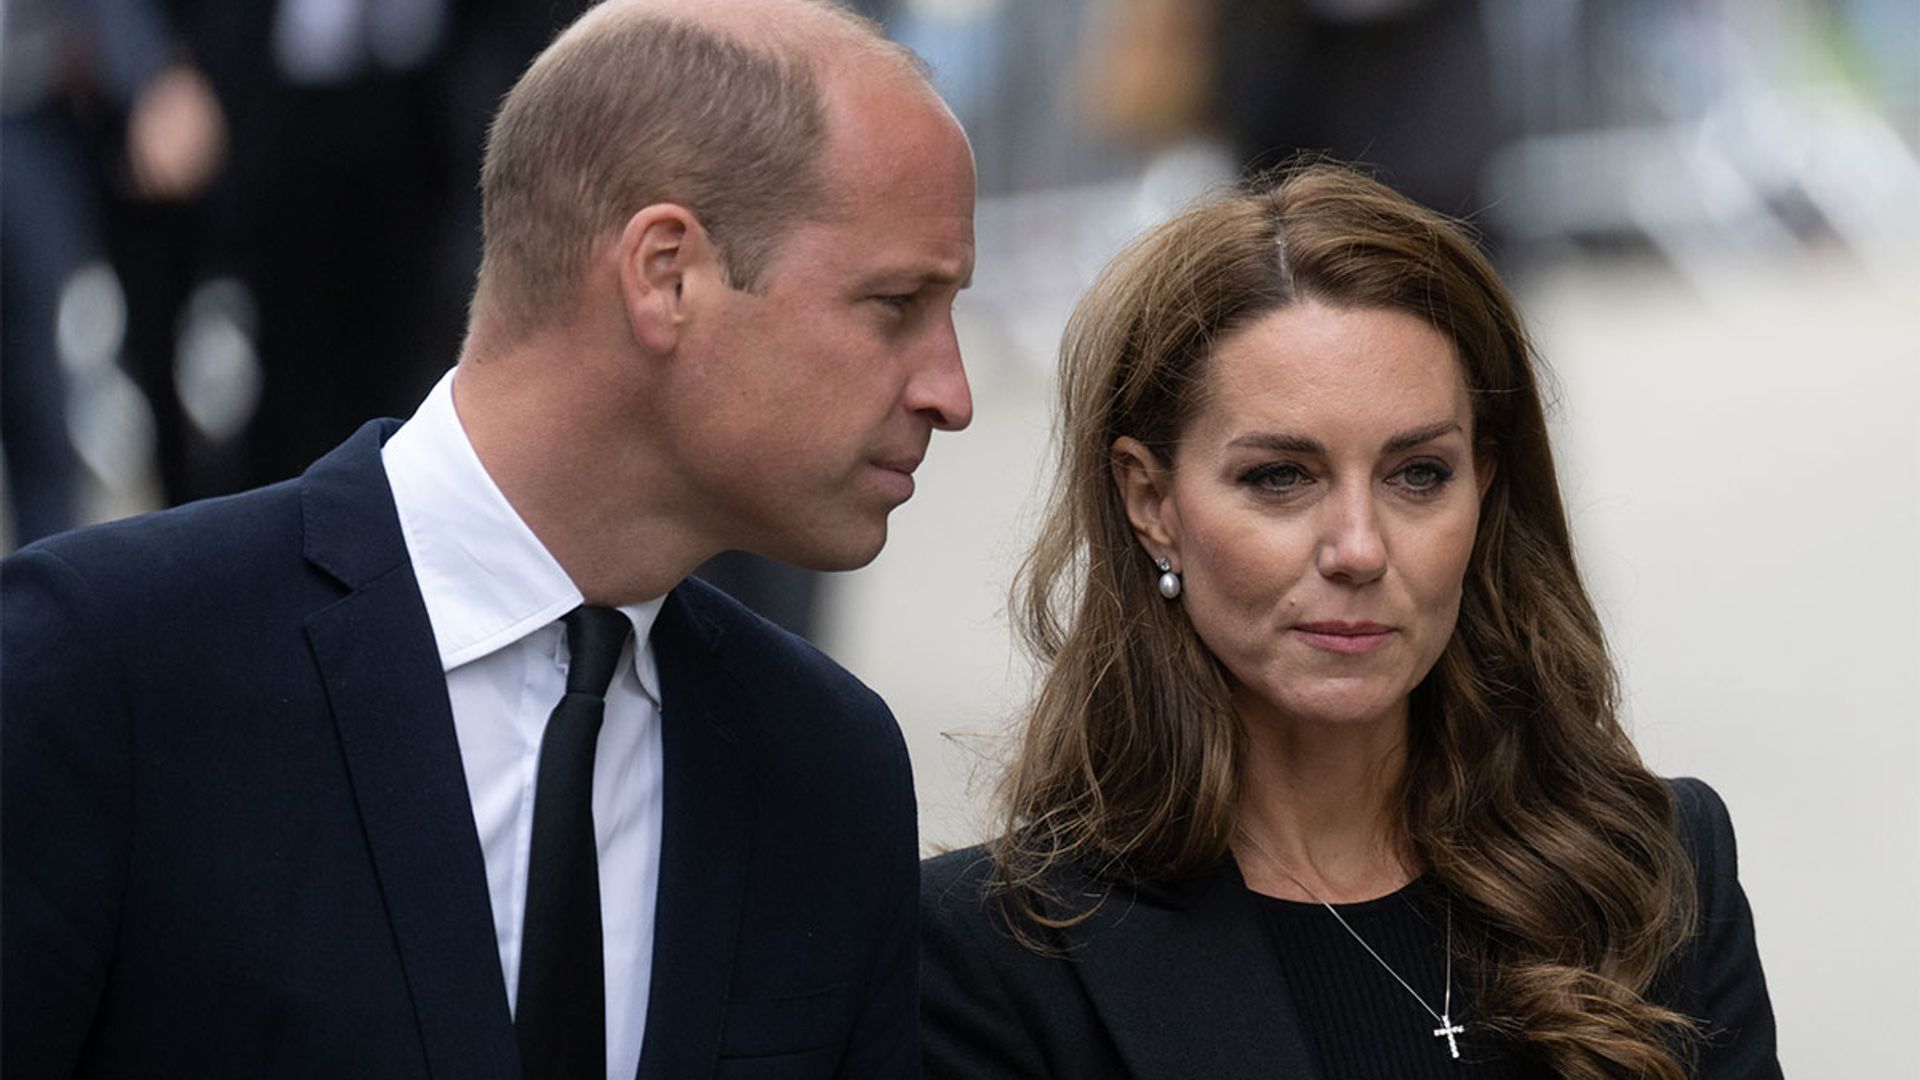 Prince William and Princess Kate’s move ‘temporary' as Windsor Castle